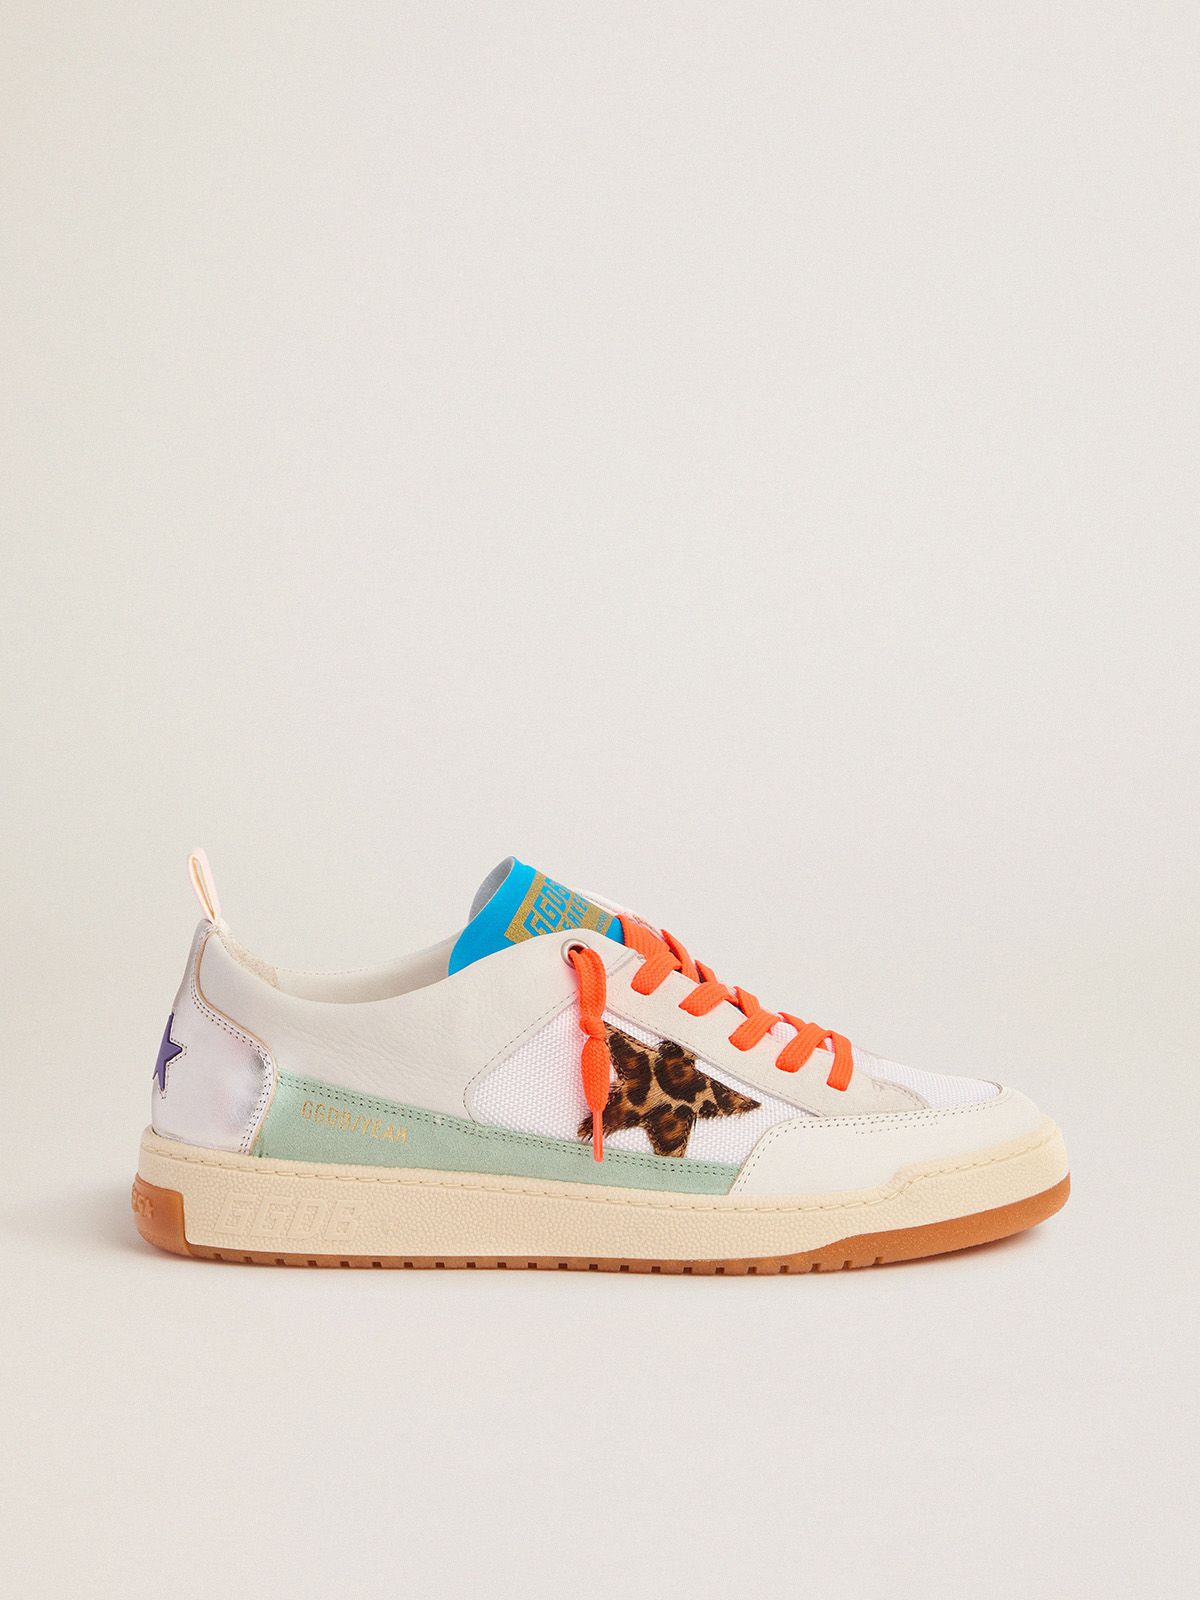 Saldi Golden Goose Uomo Men’s white and blue Yeah sneakers with leopard-print star